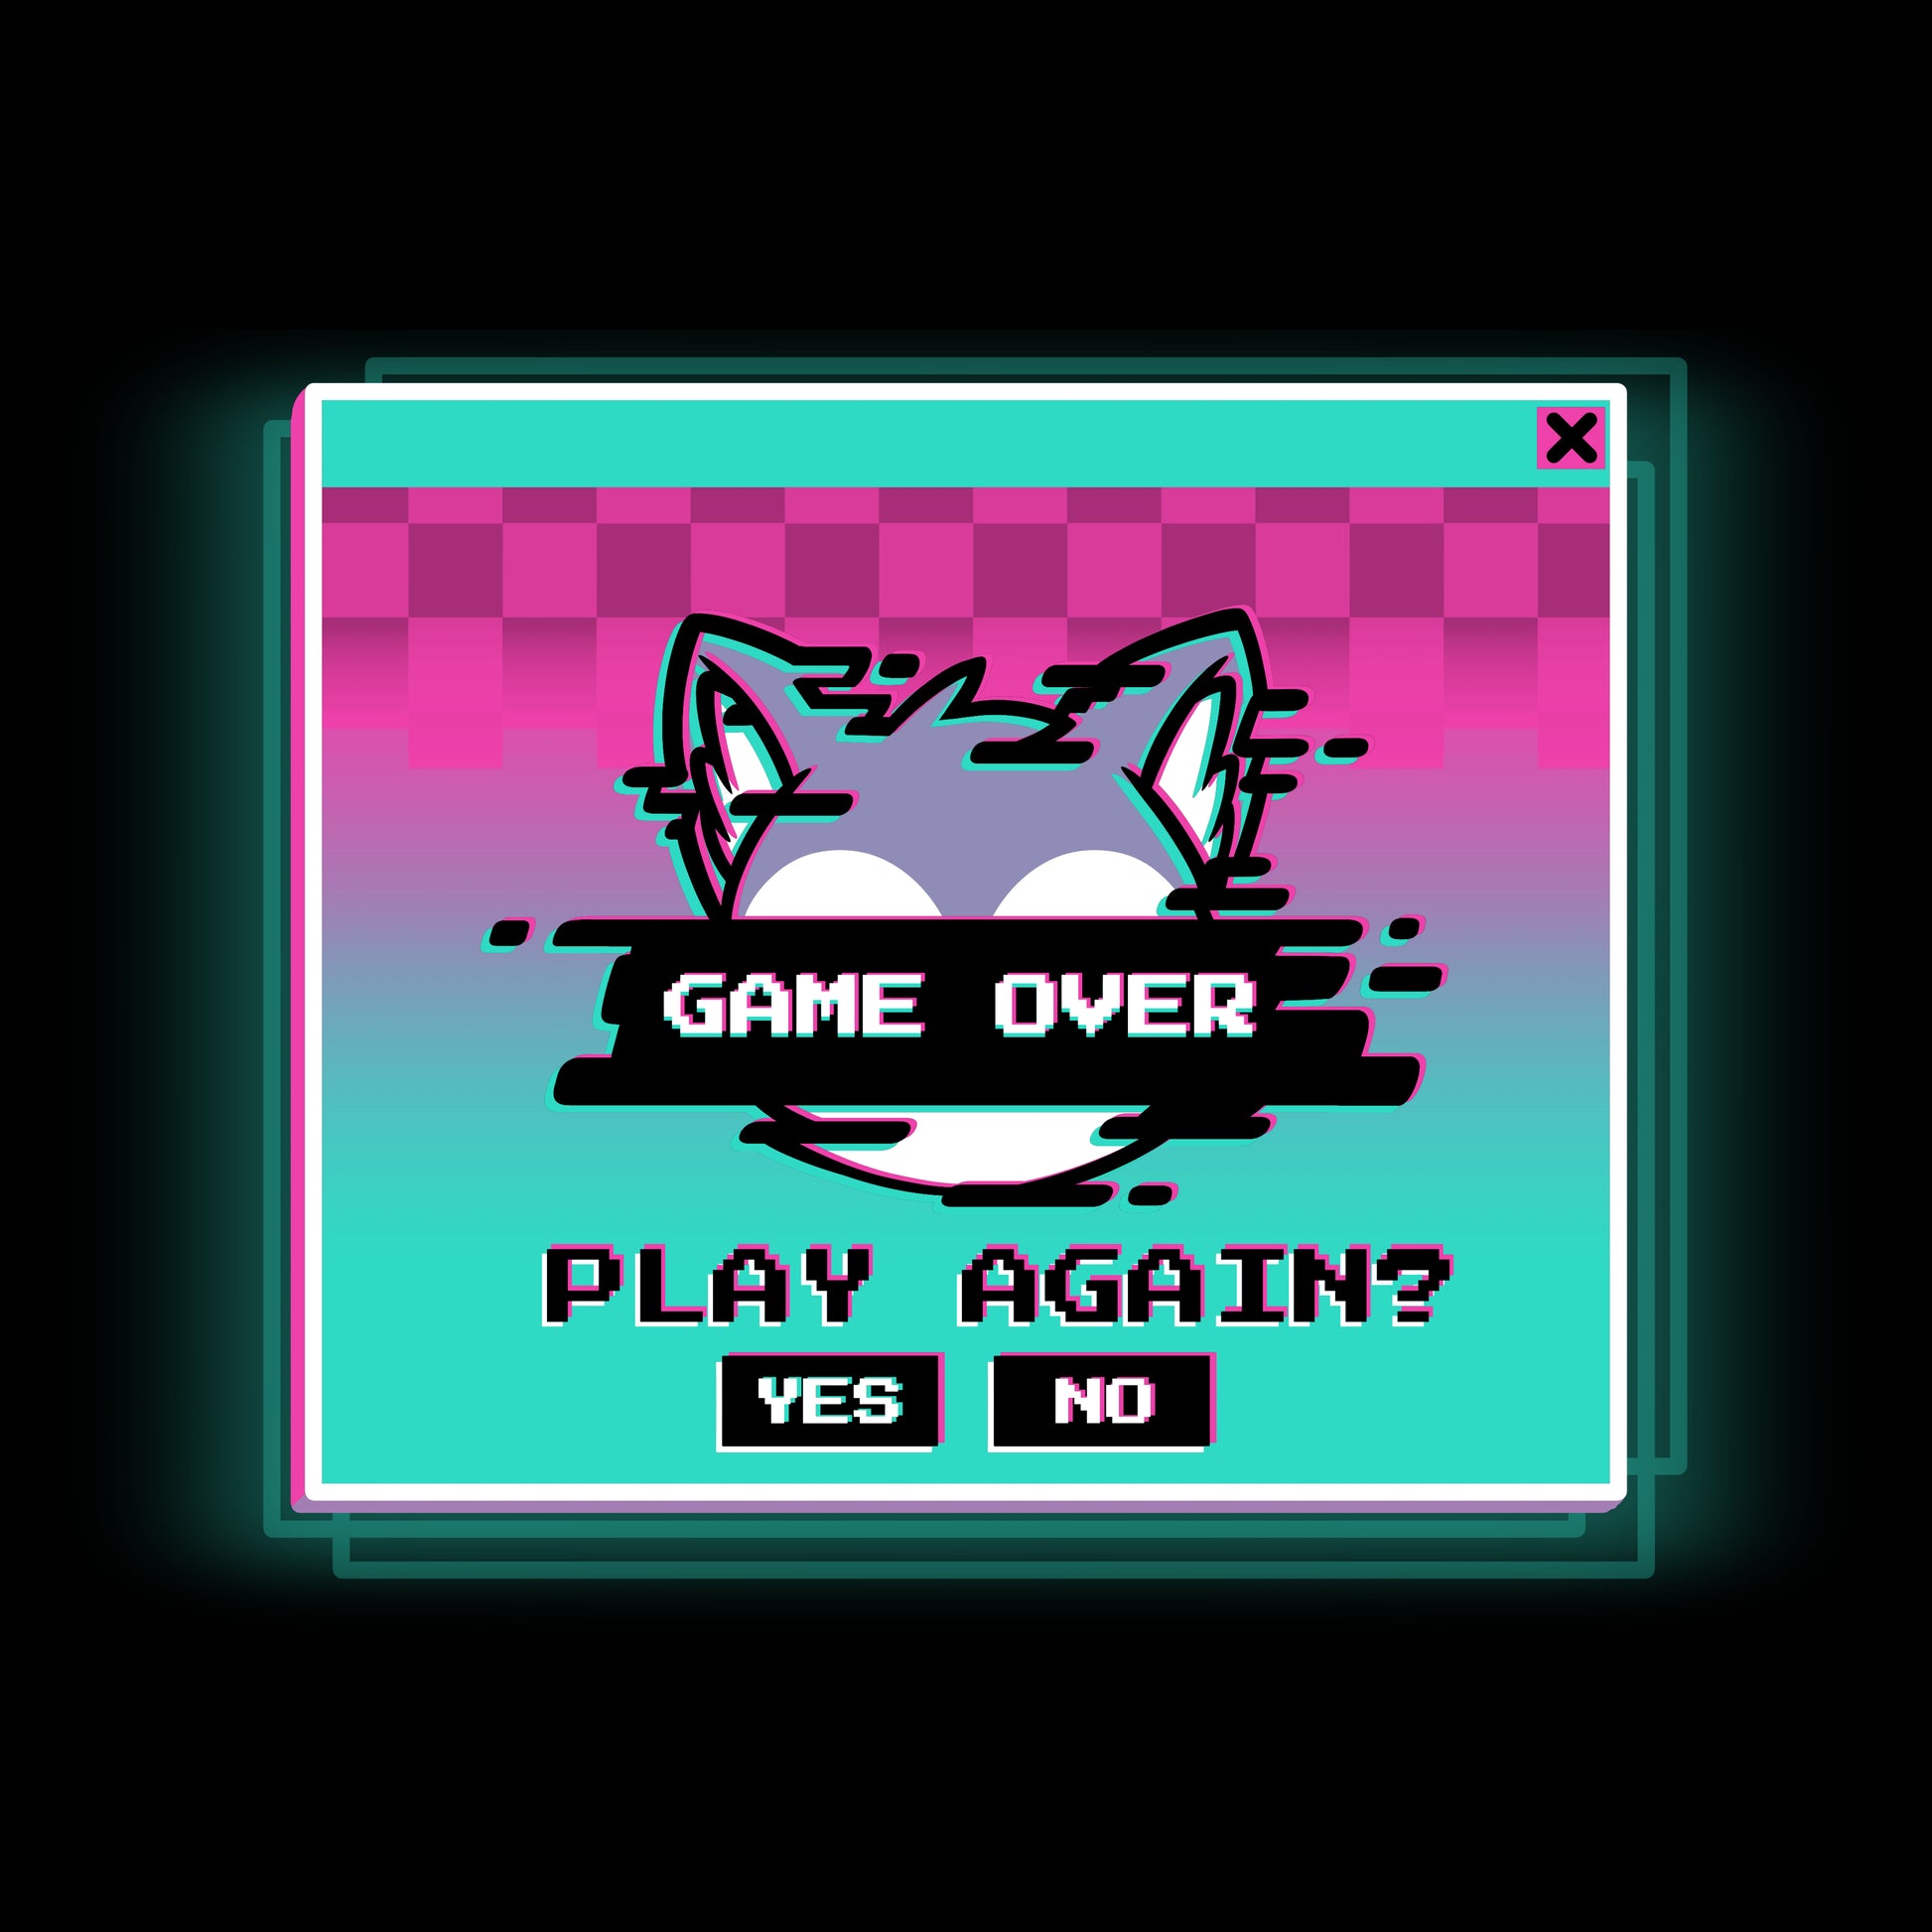 A TeeTurtle game over screen with the words "Game Over" and an option to "Play Again".